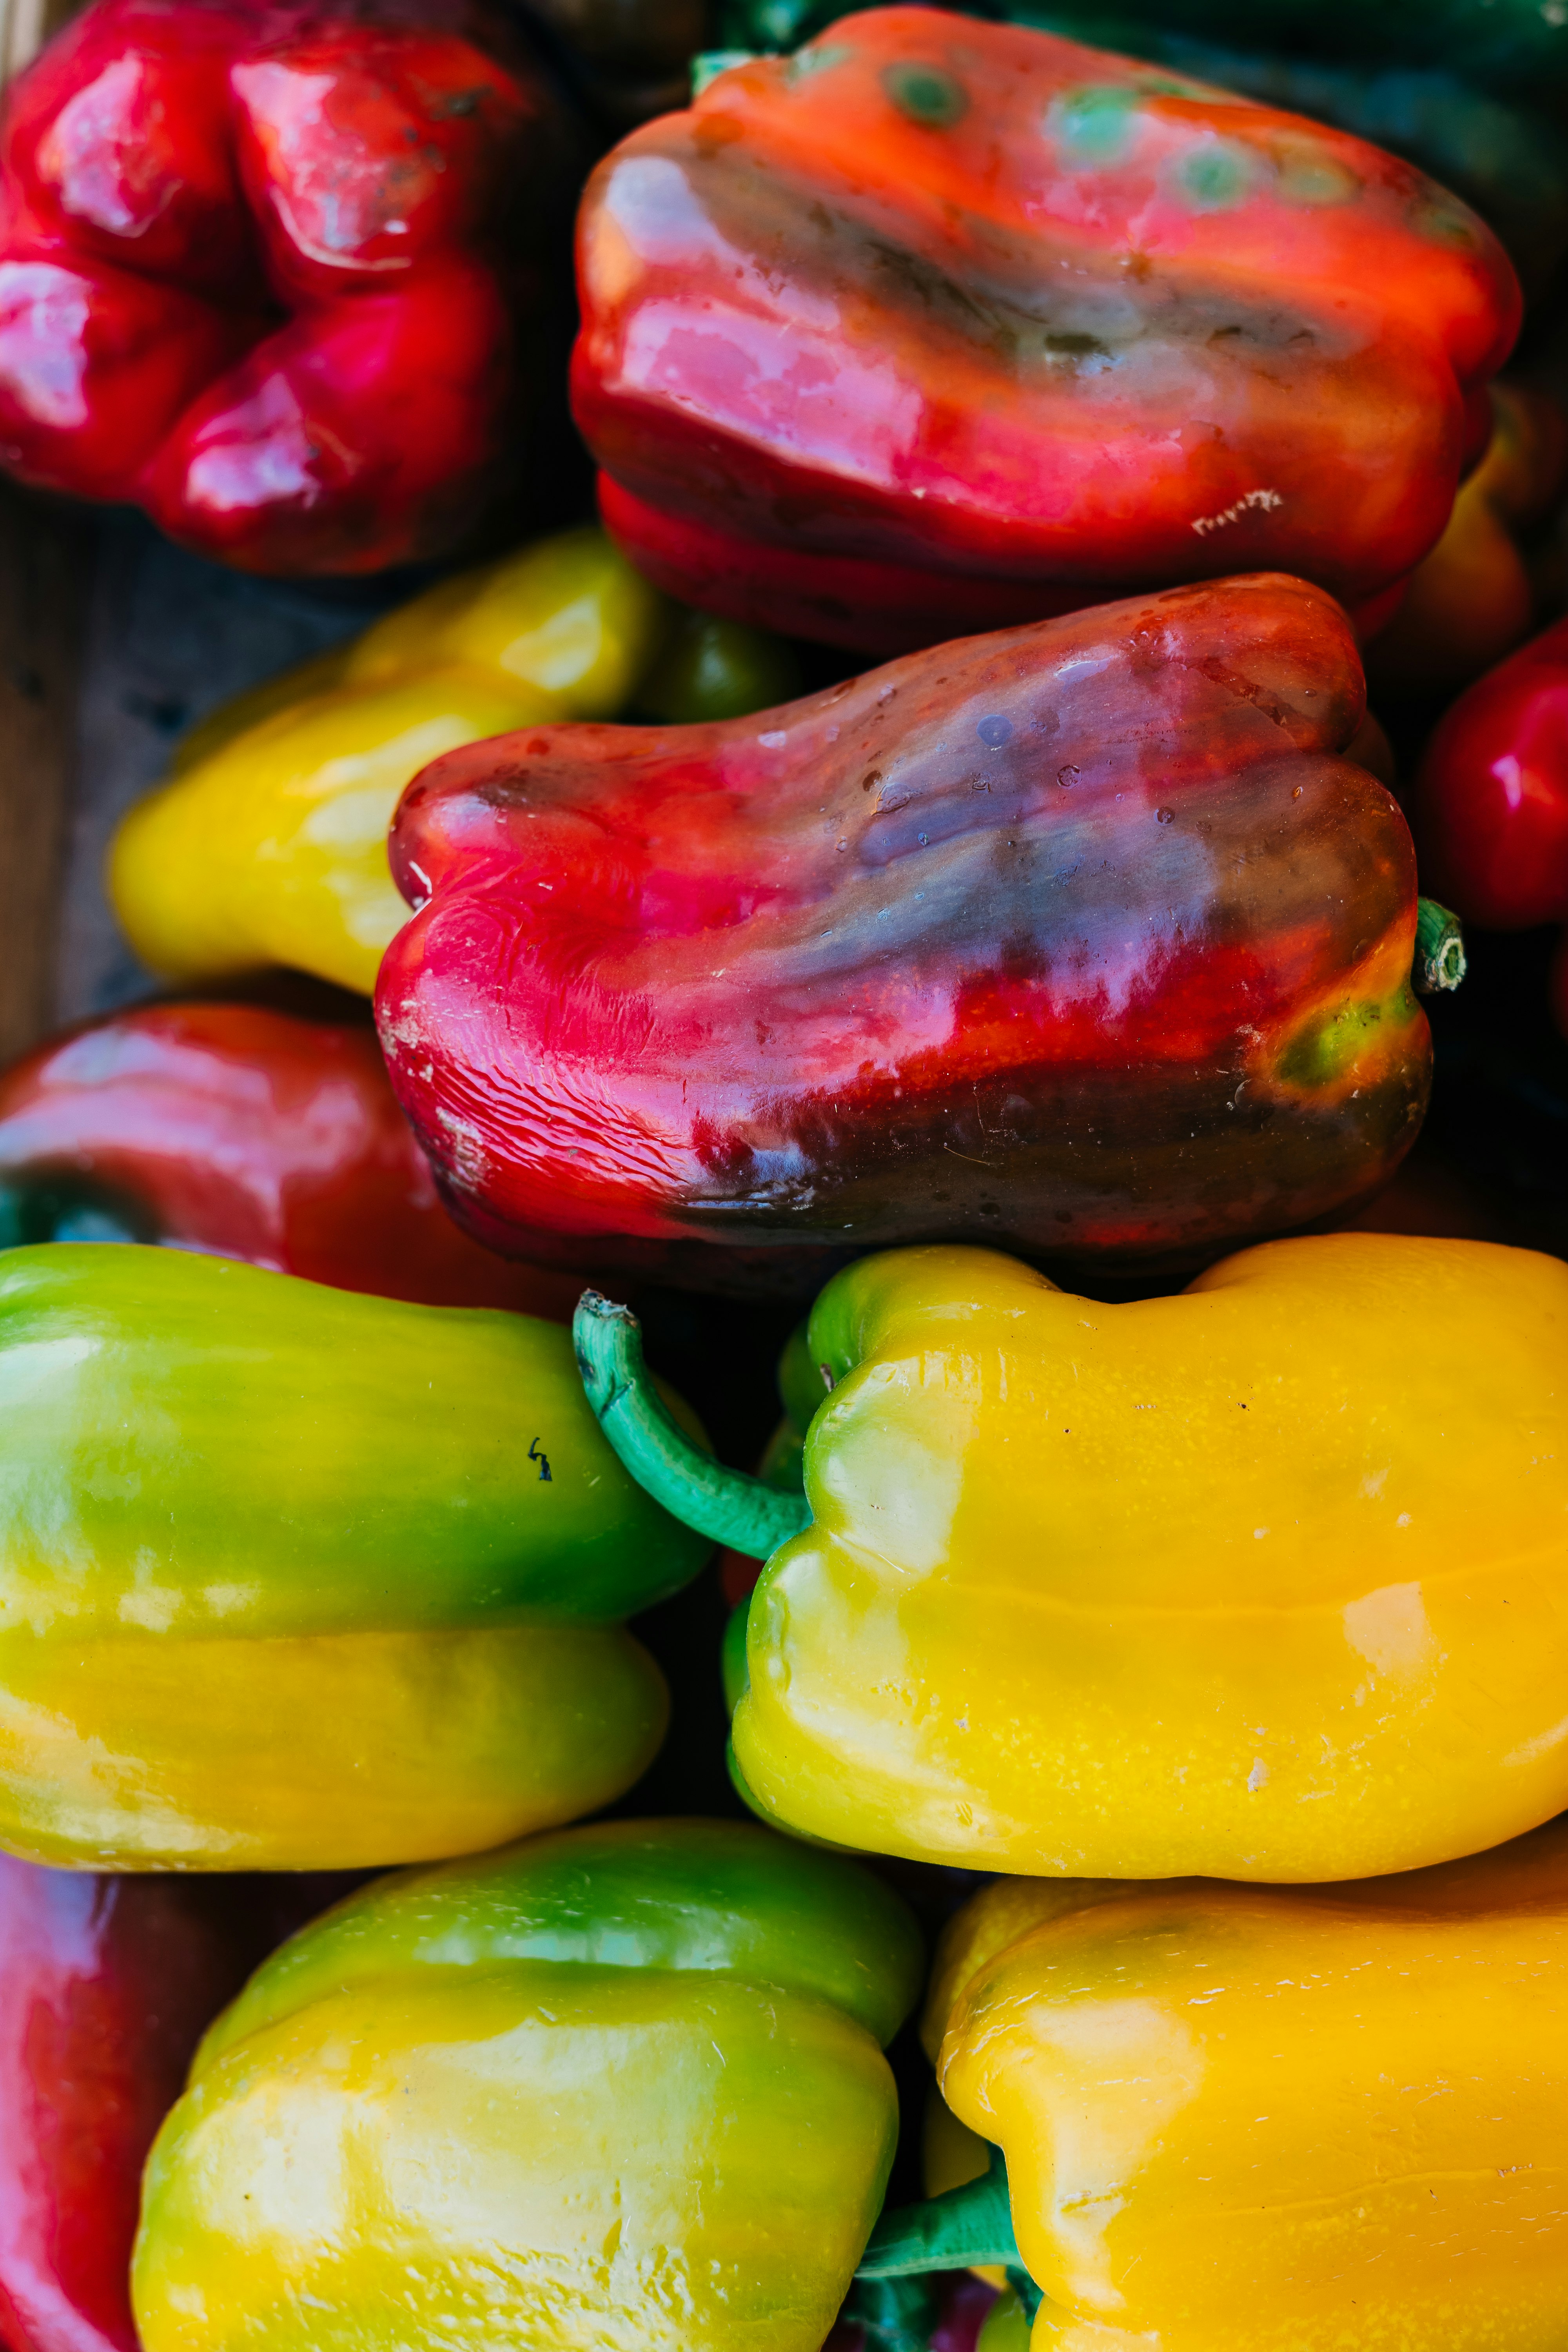 yellow red and green bell peppers